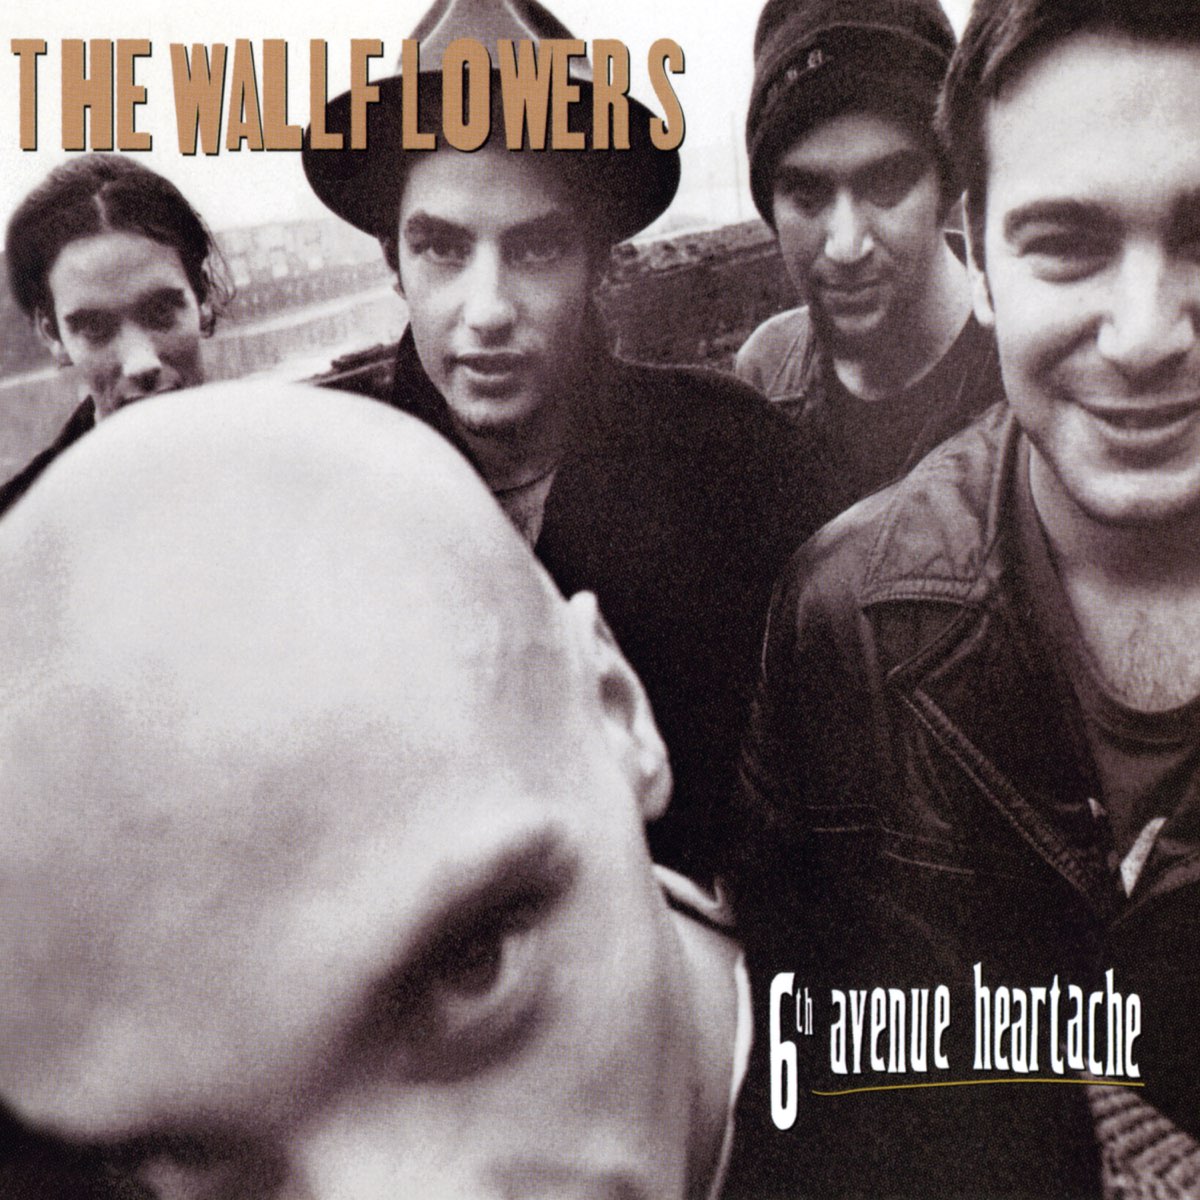 ‎6th Avenue Heartache EP by The Wallflowers on Apple Music